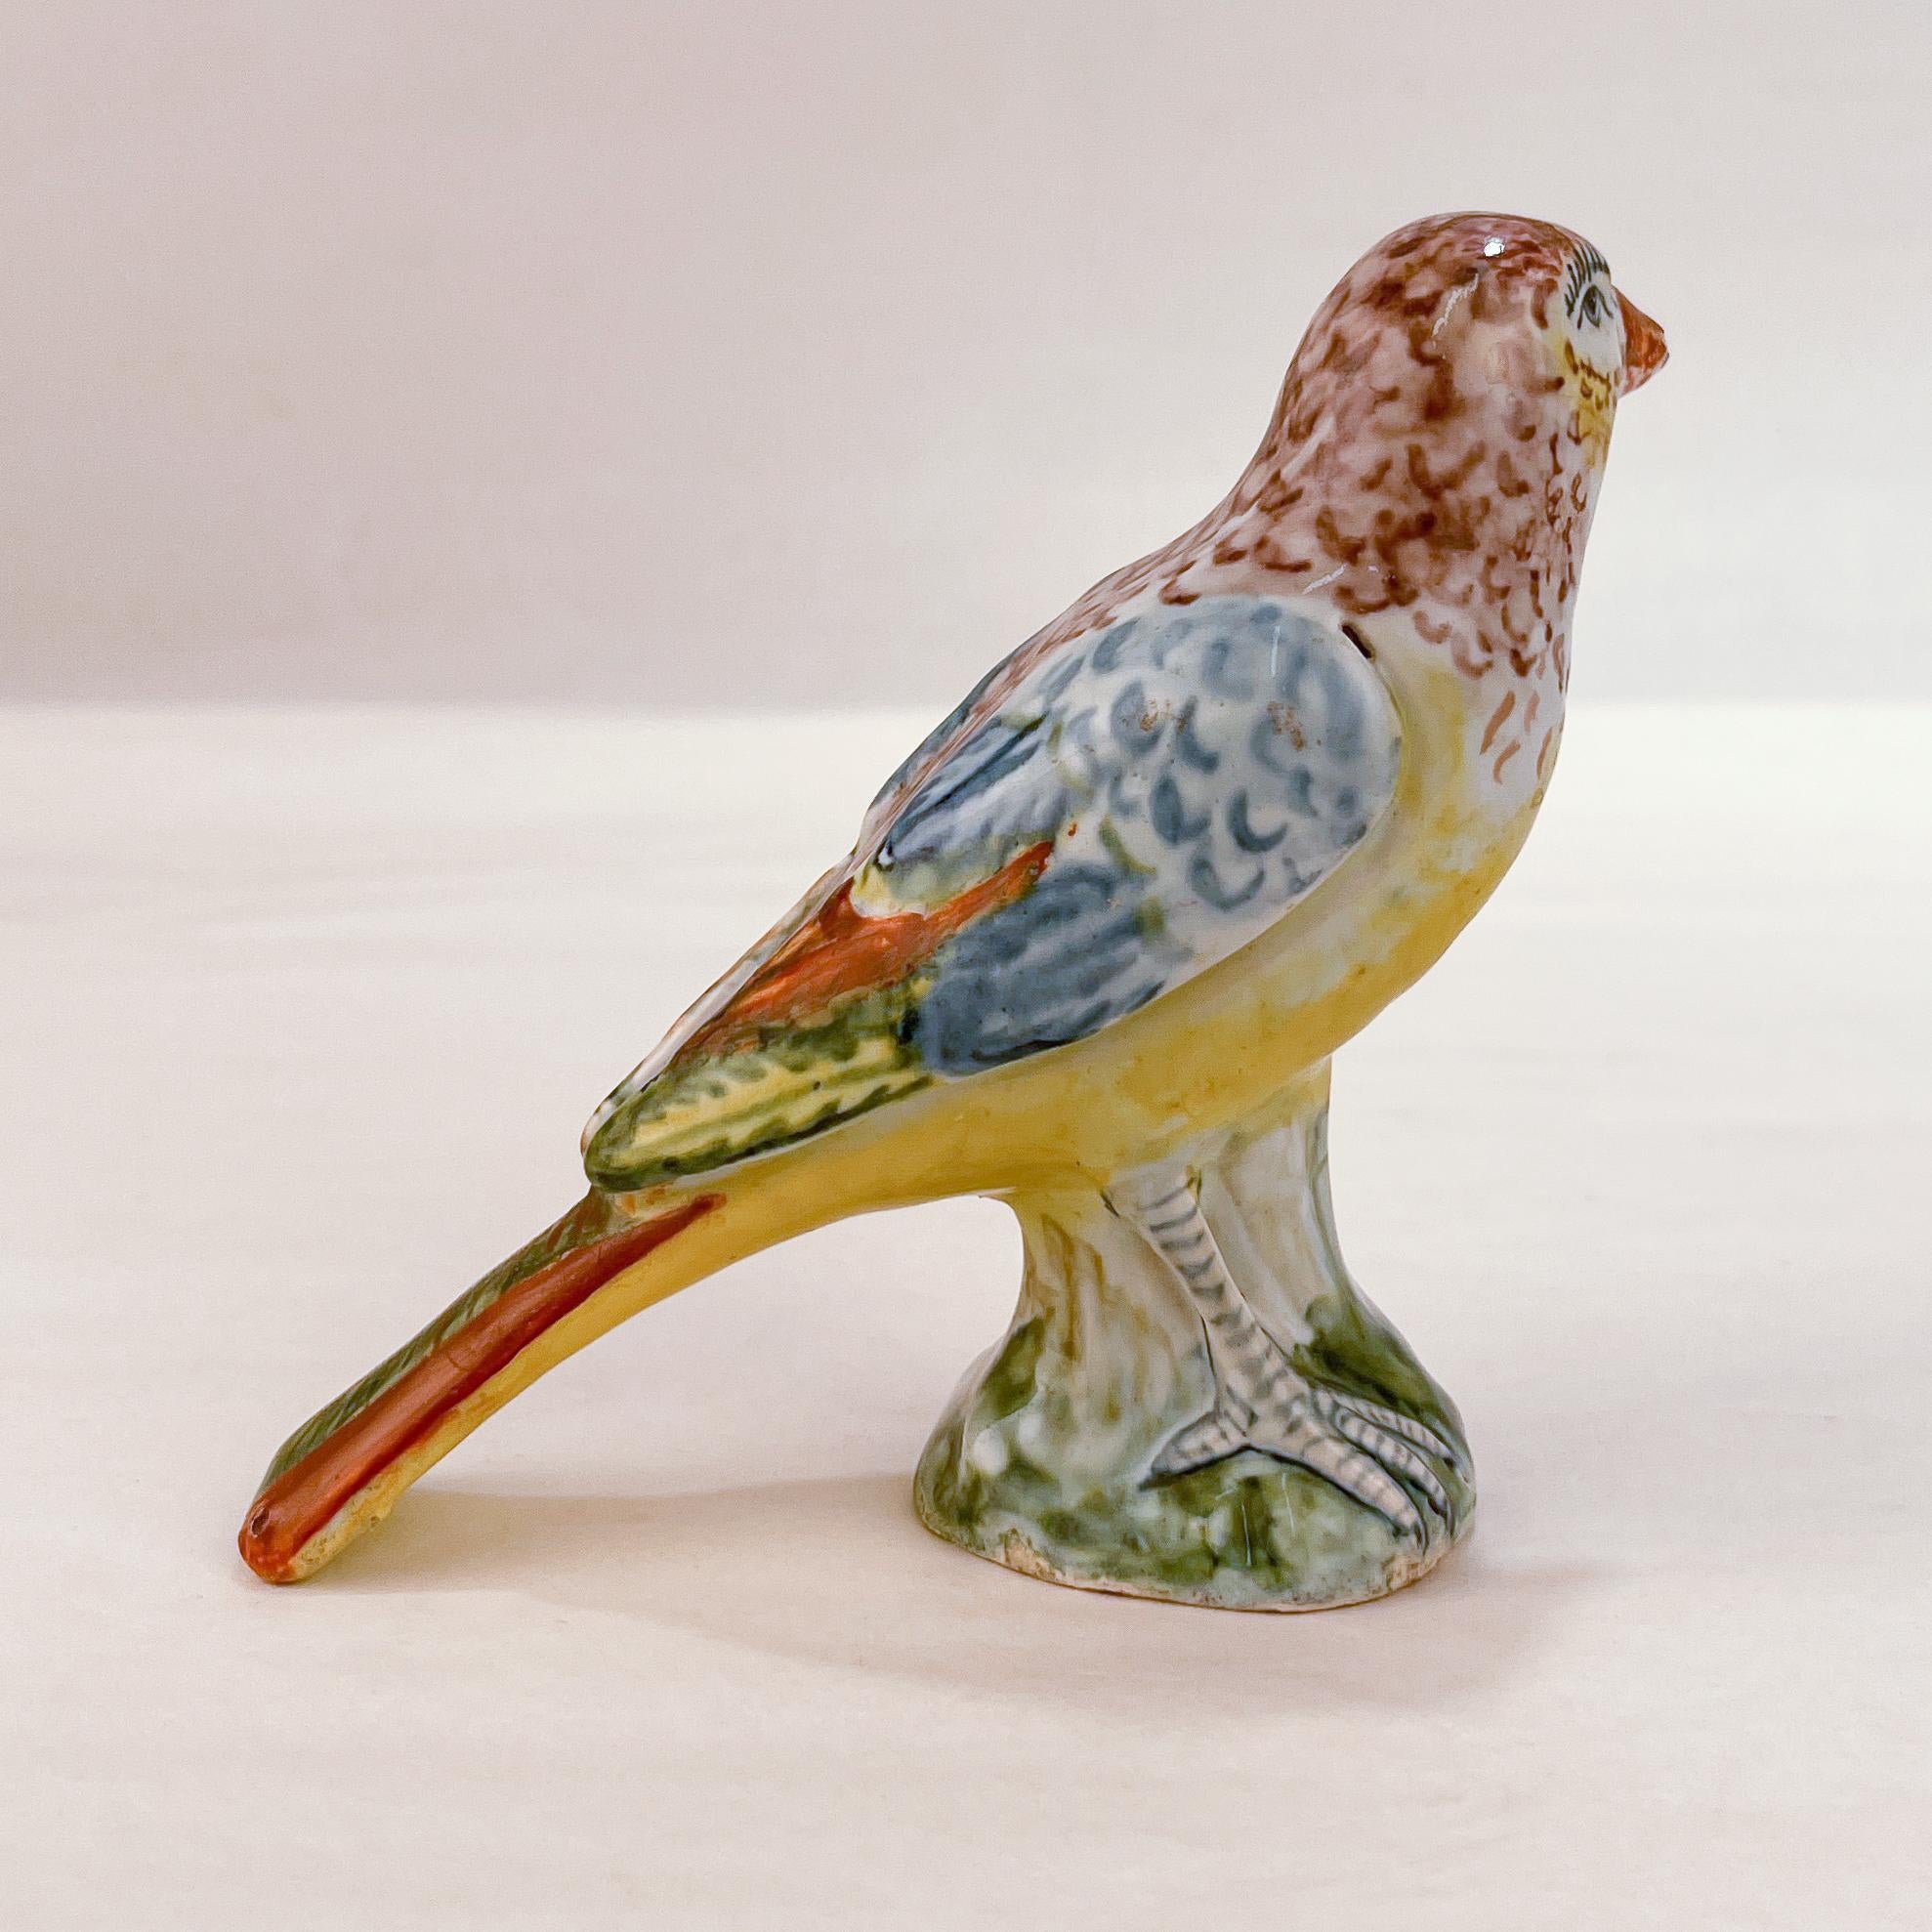 Hand-Painted Antique Polychrome A Pennis Attributed Dutch Delft Pottery Bird Figurine / Model